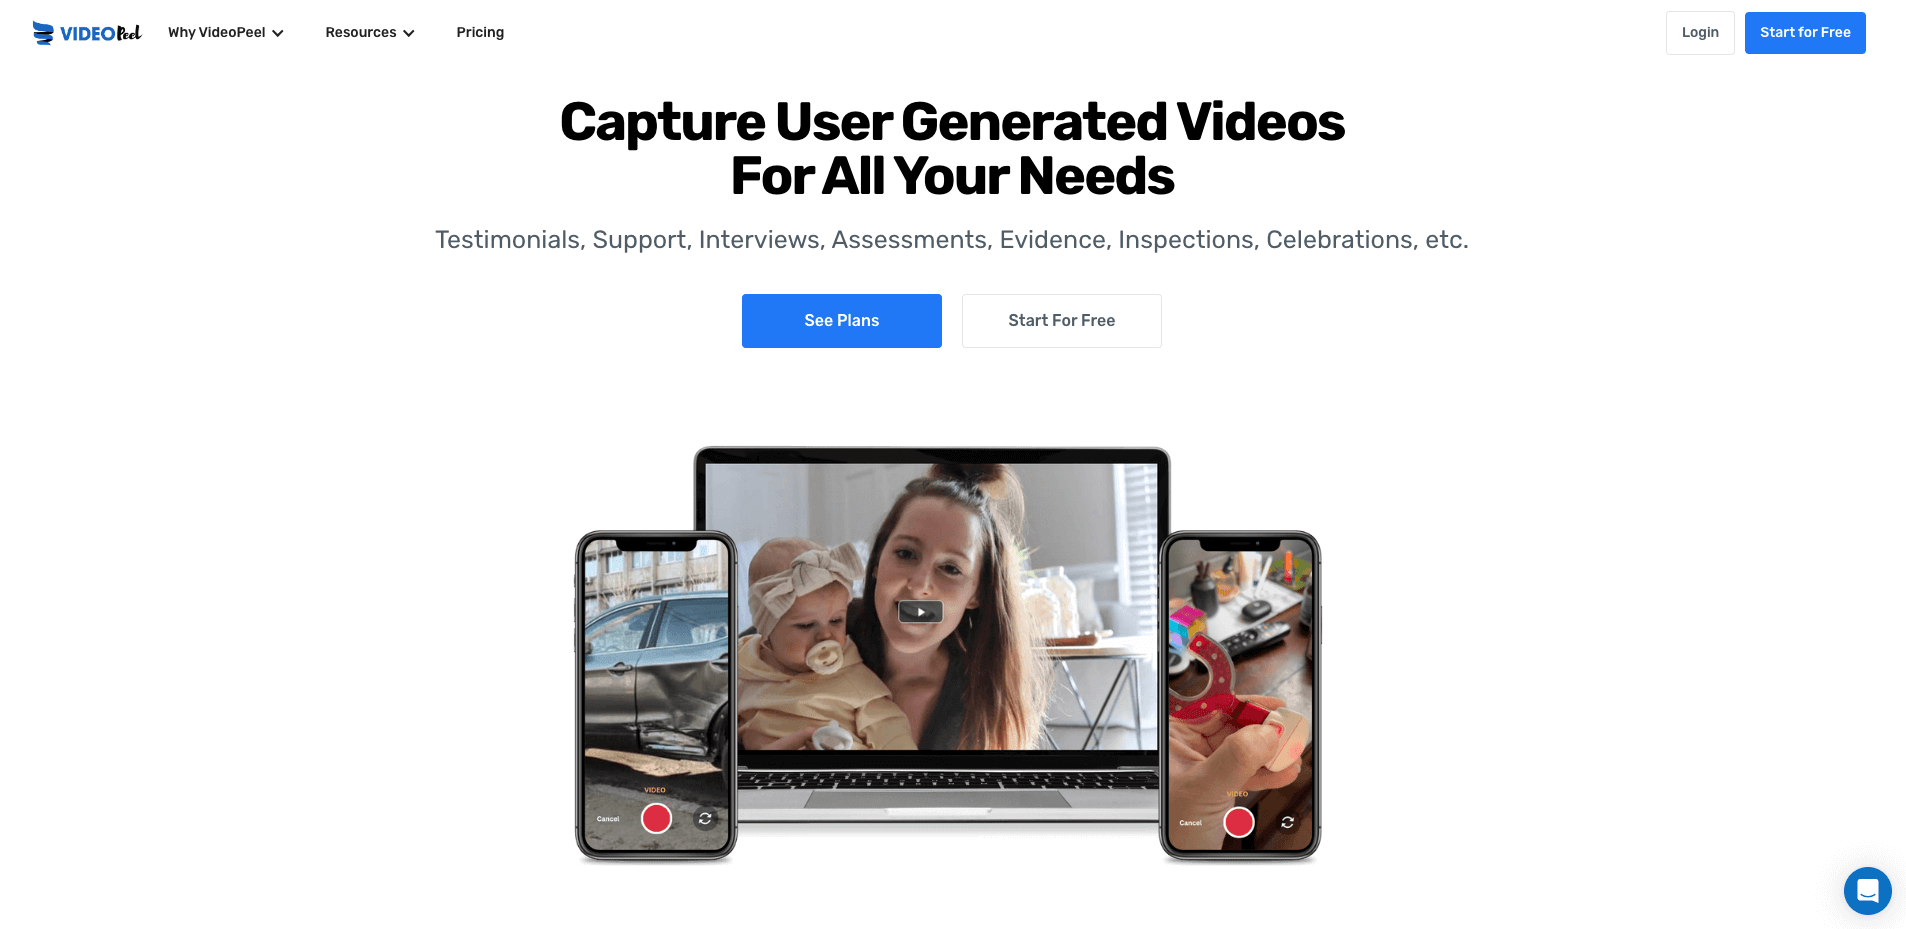 VideoPeel homepage: Capture User Generated Videos For All Your Needs